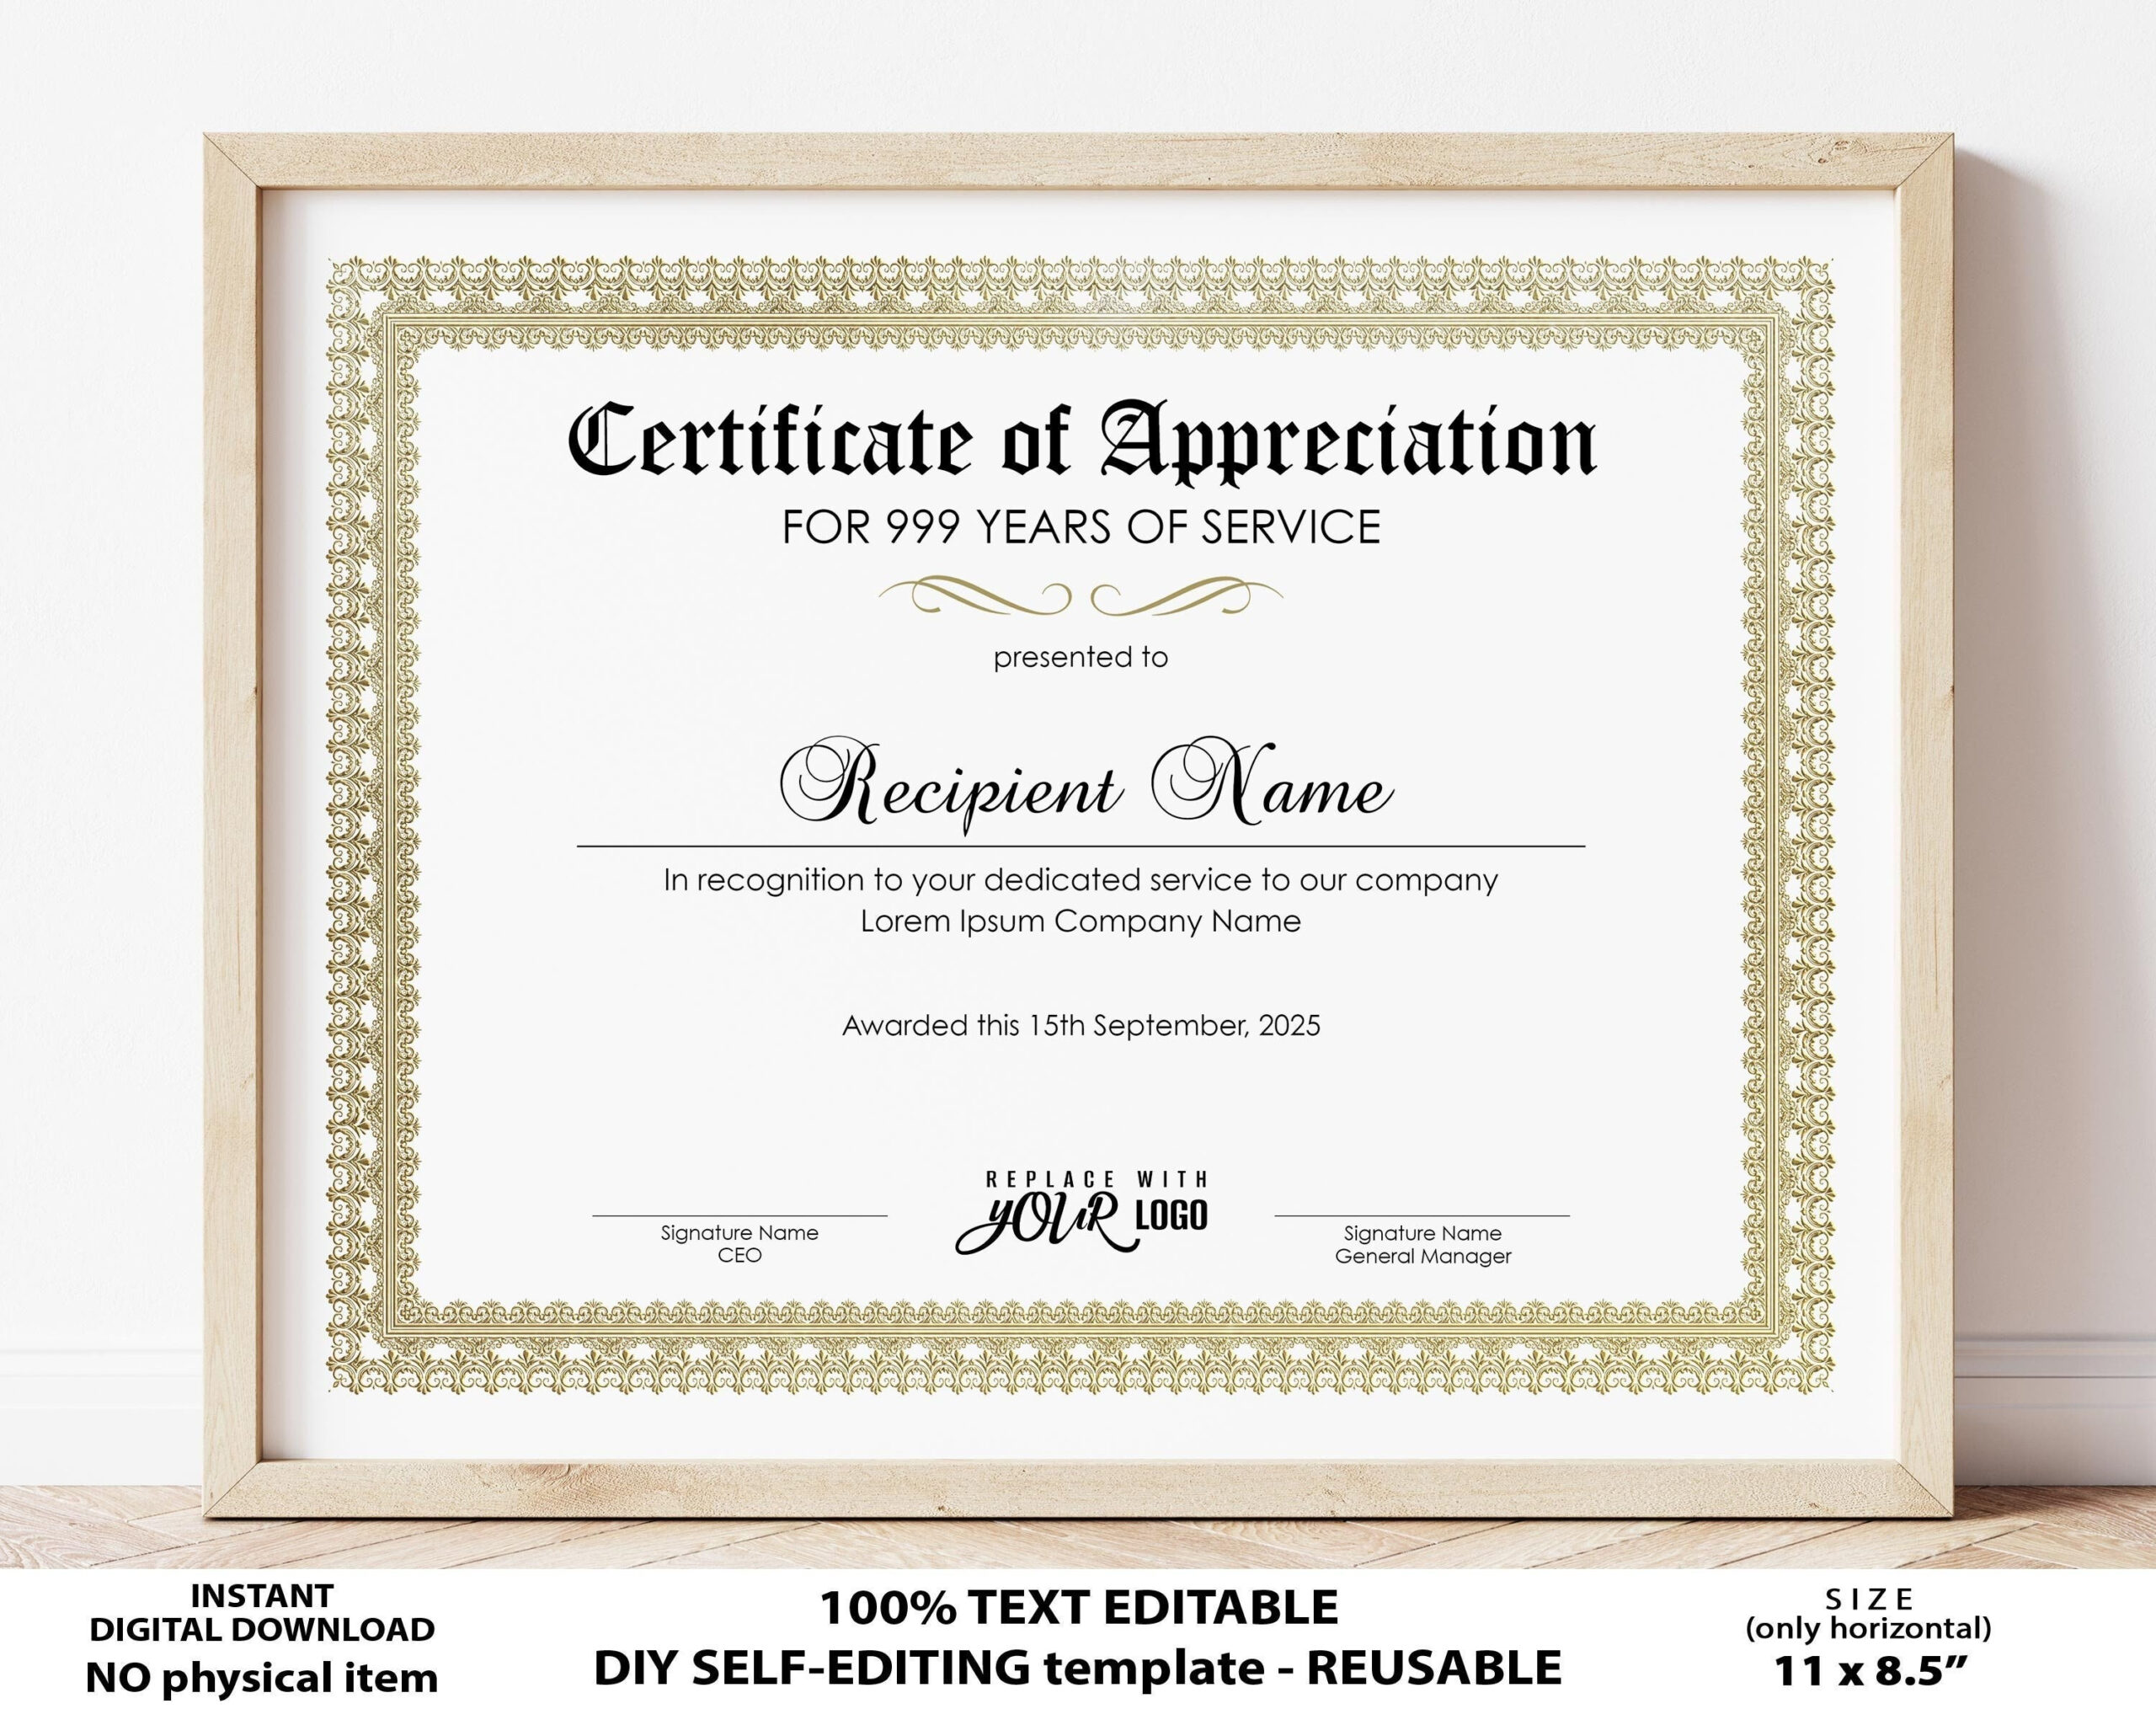 Editable Years of Service Certificate of Appreciation - Etsy